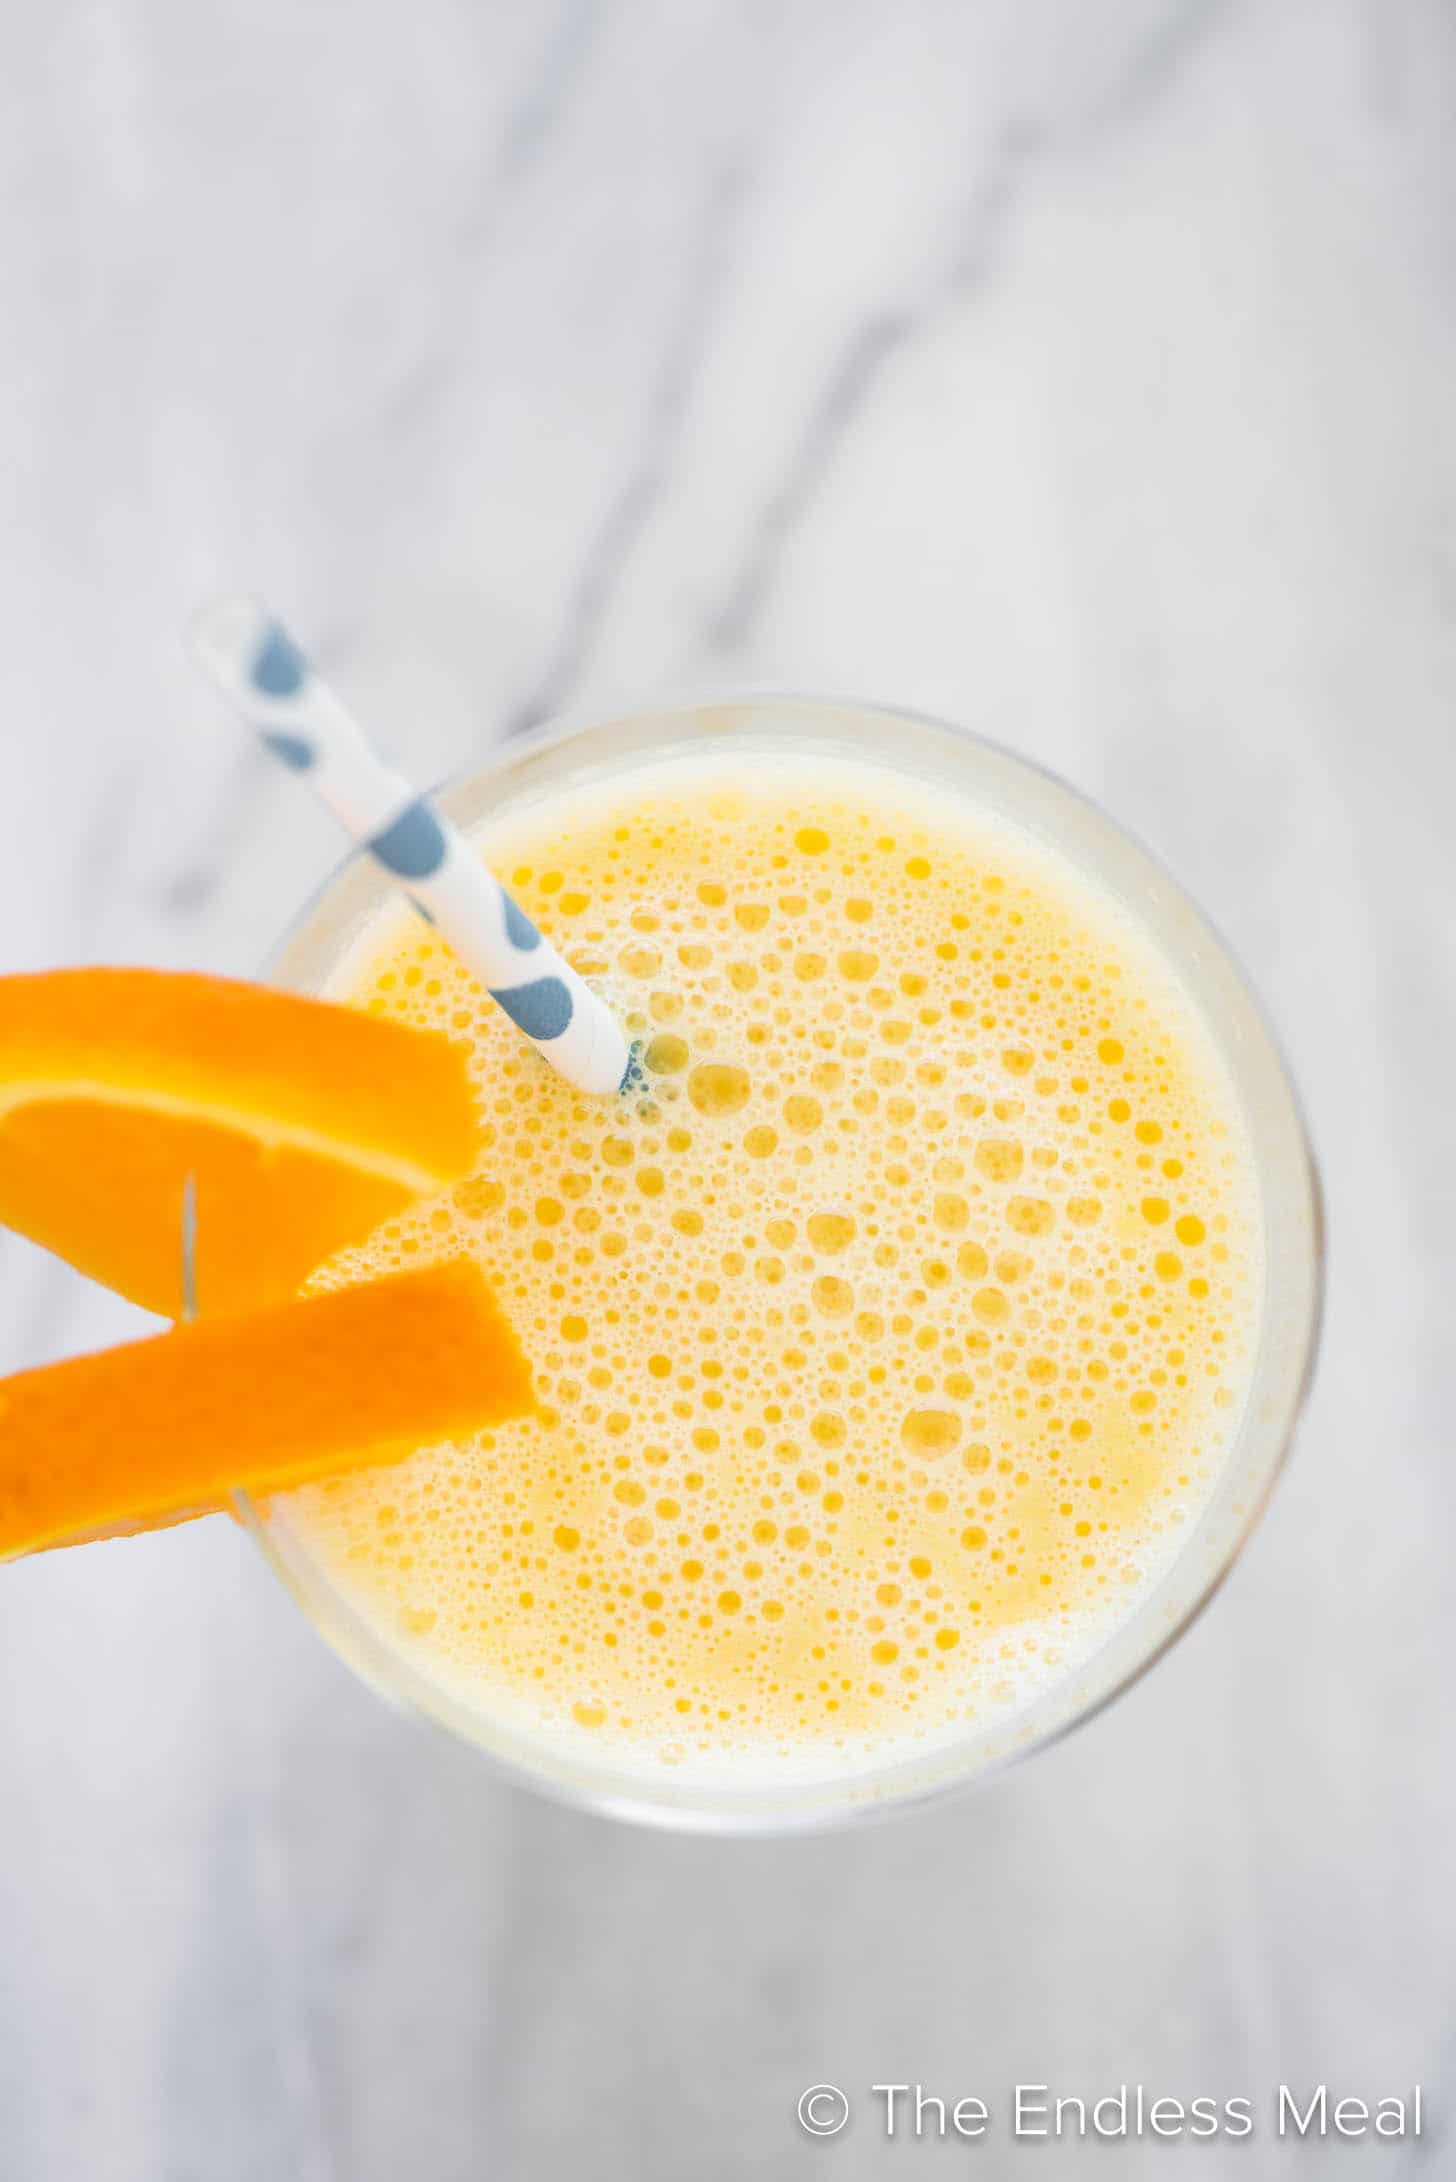 Looking down on an orange smoothie with a straw and orange slices.